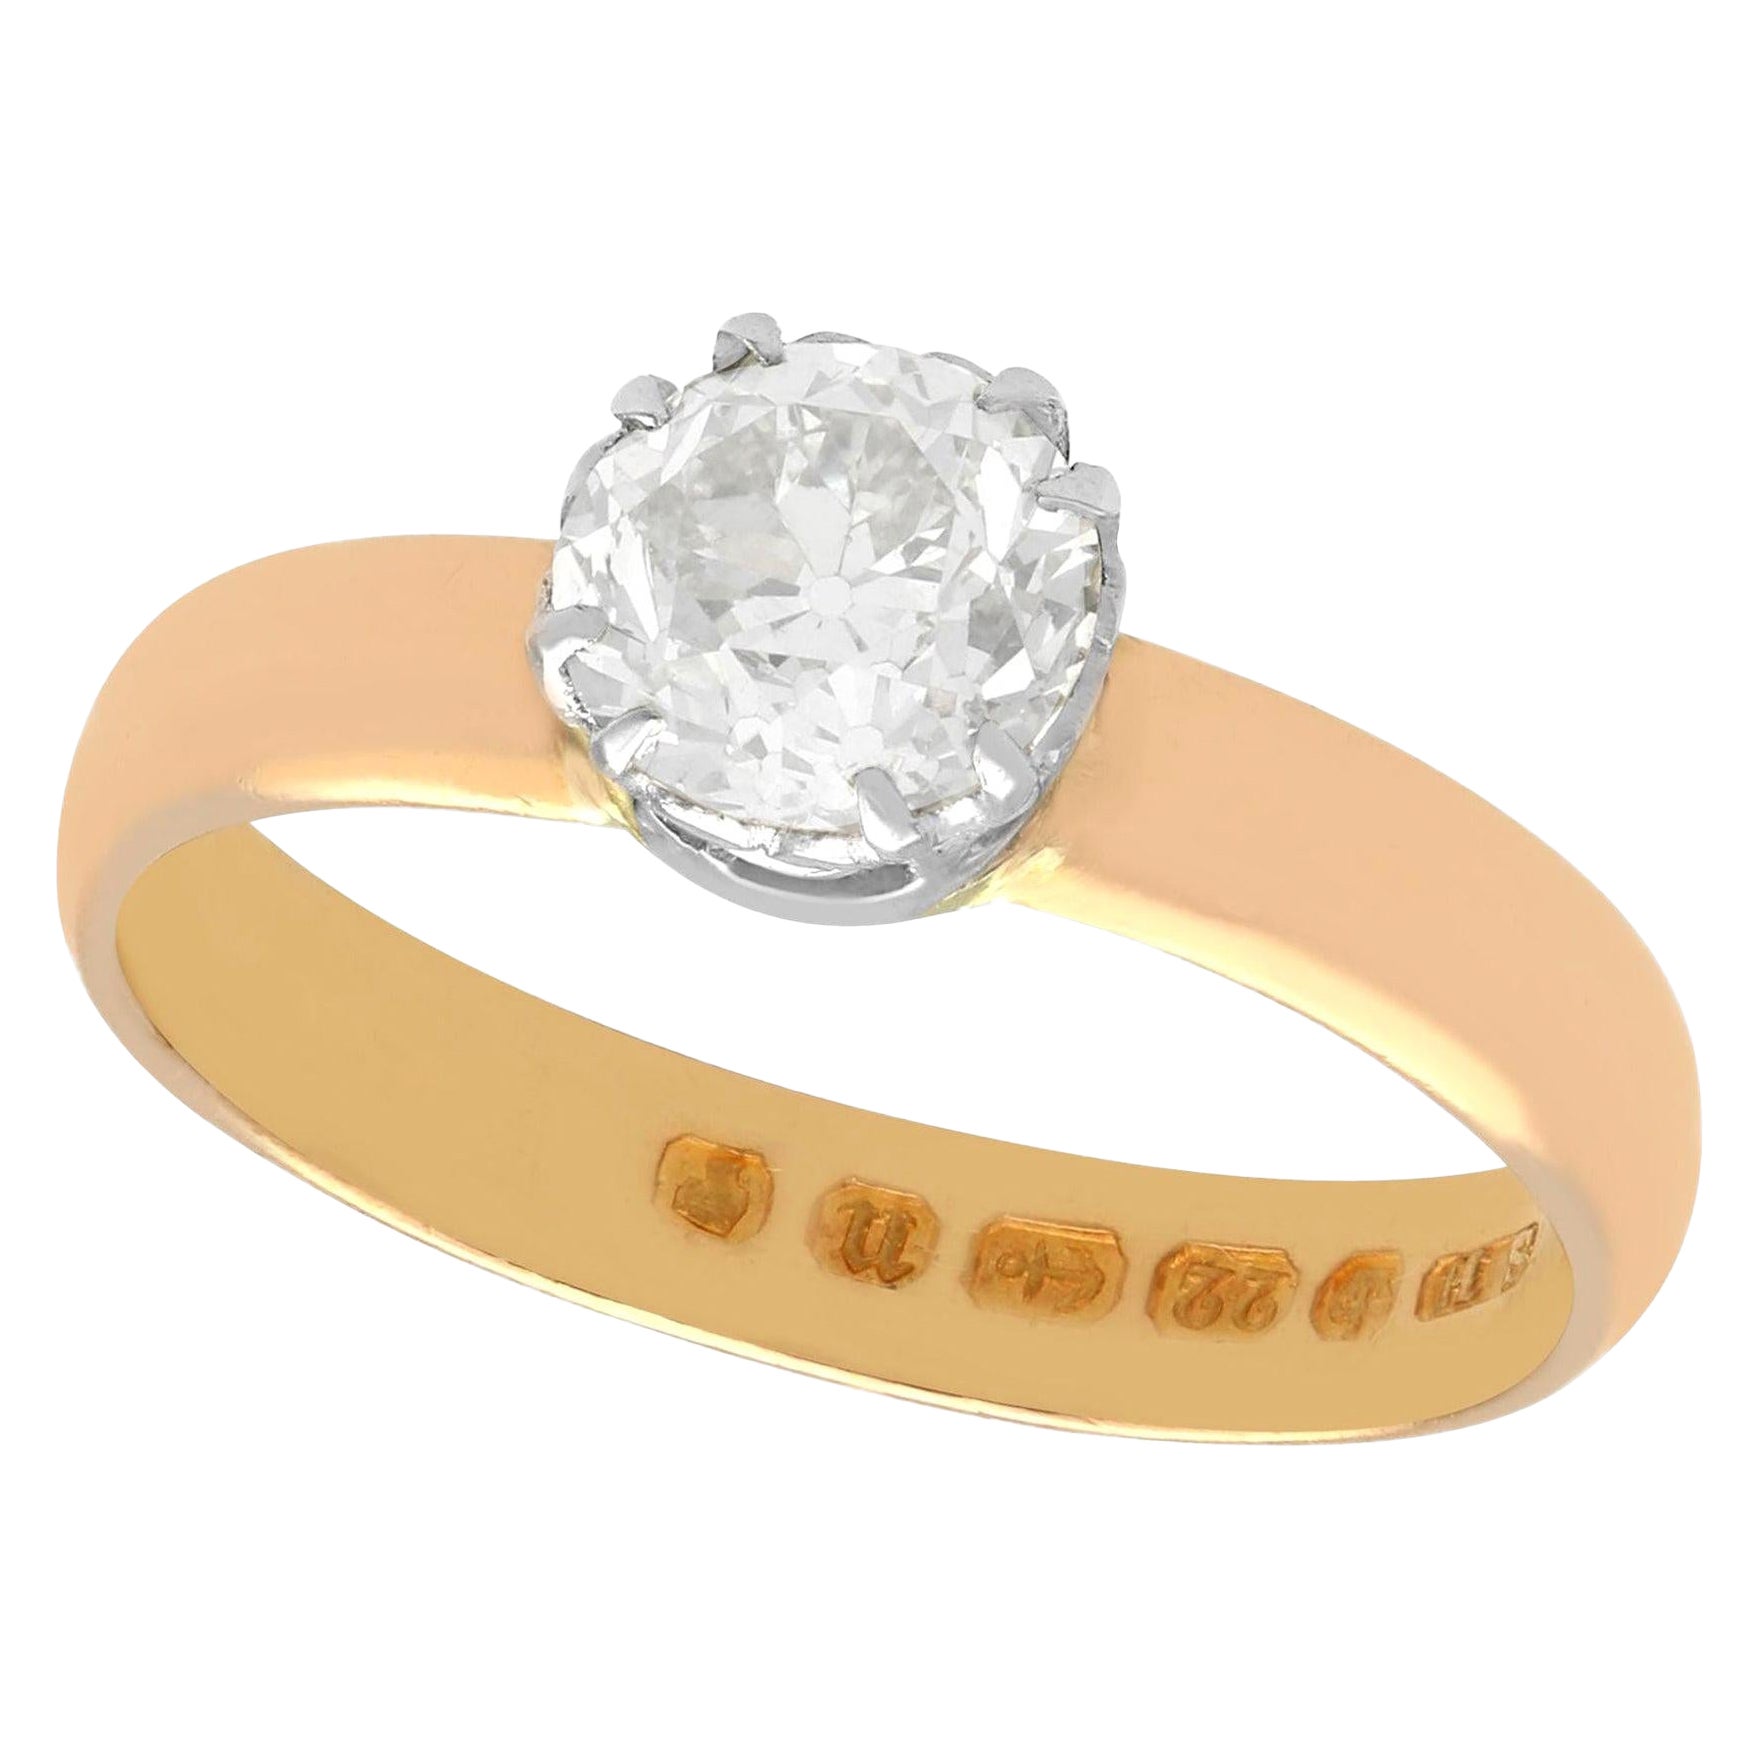 Victorian 1.34 Carat Diamond and 22k Rose Gold Solitaire Ring For Sale